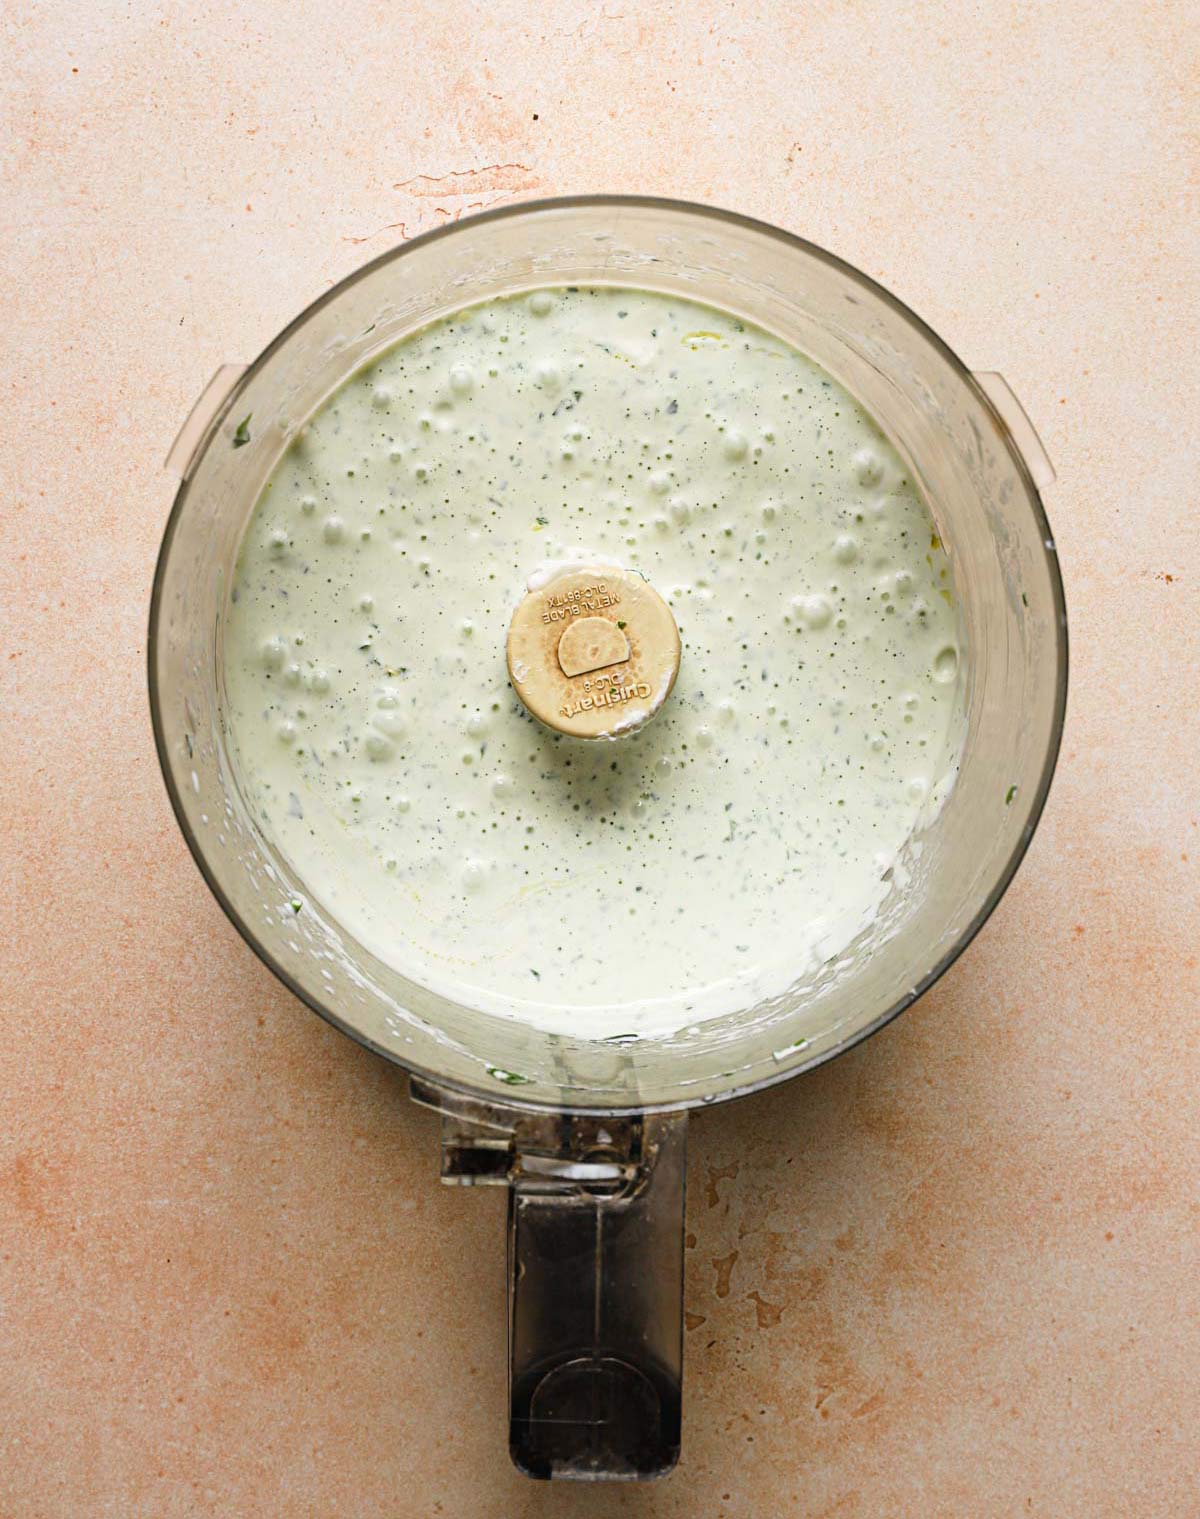 Freshly mixed homemade buttermilk ranch dressing in a food processor bowl.